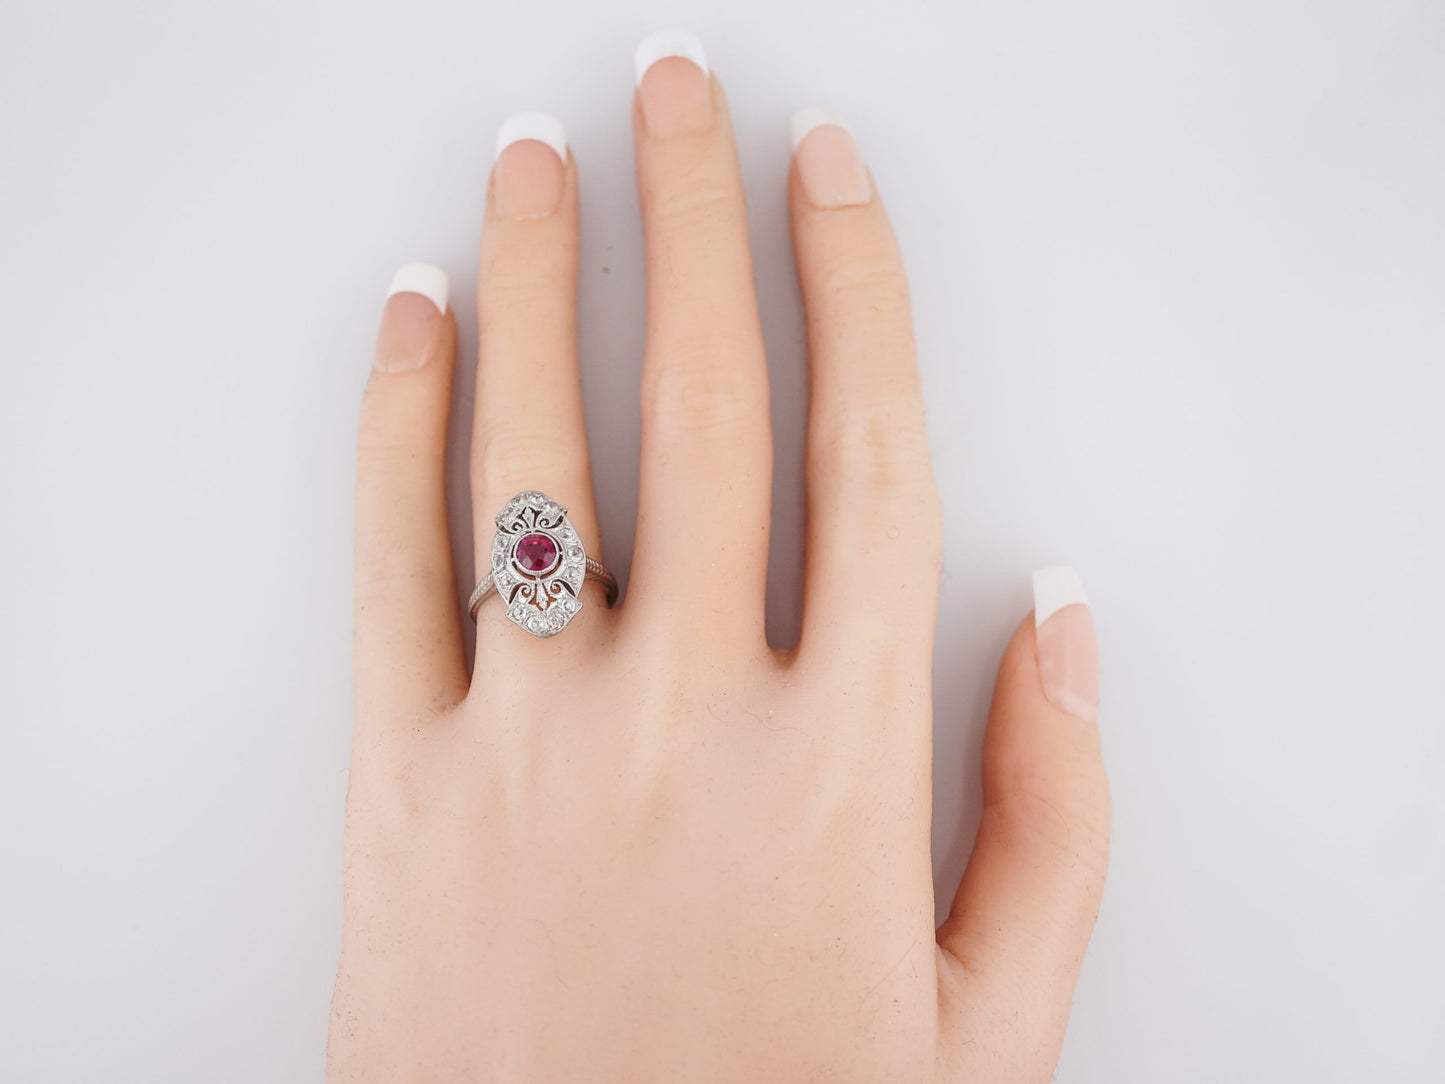 Modern Right Hand Ring .63 Round Cut Ruby in 18k White Gold